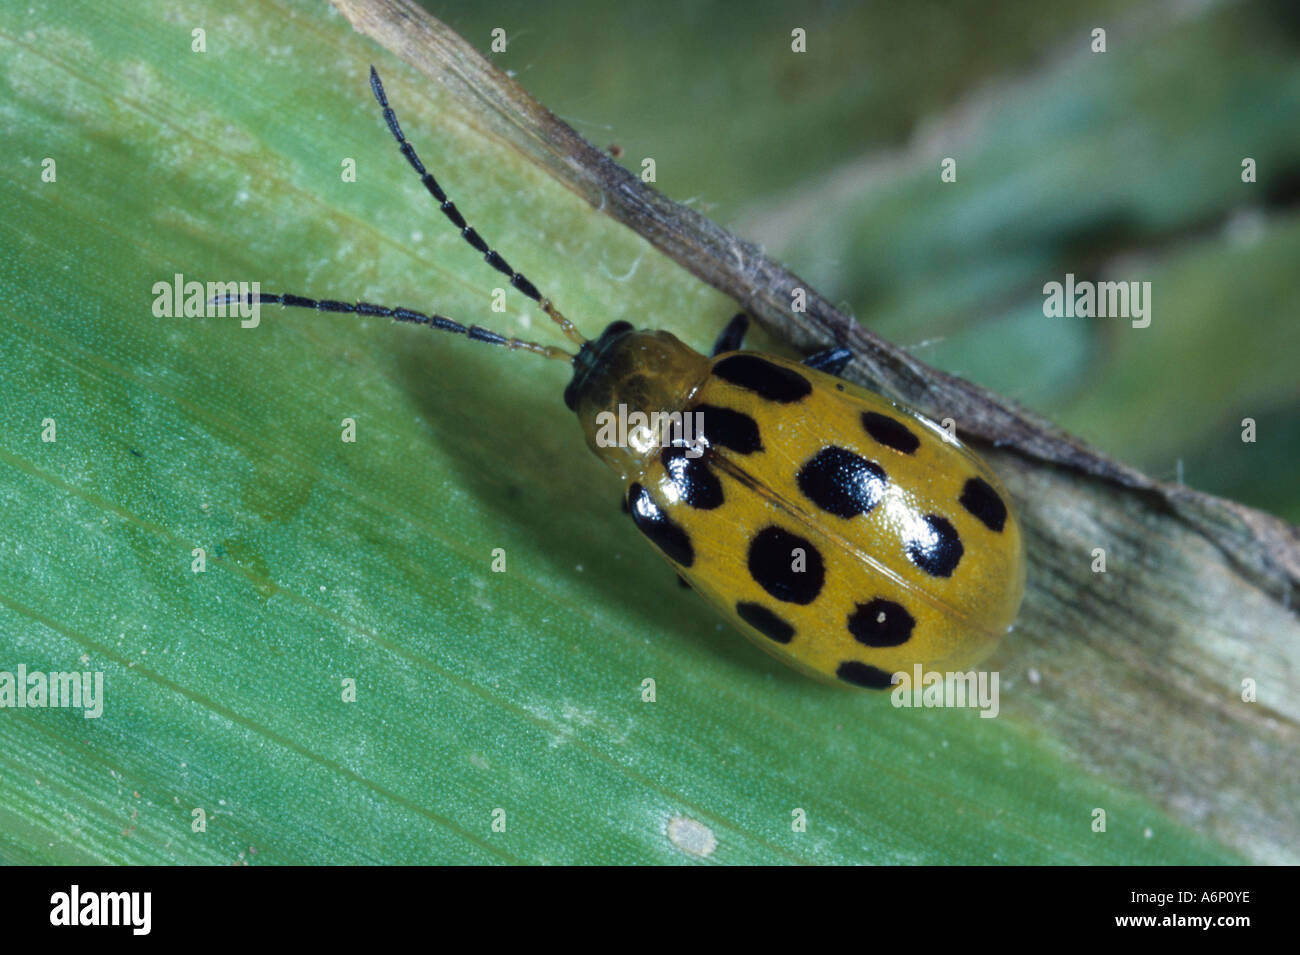 Adult spotted cucumber beetle, Diabrotica Stock Photo